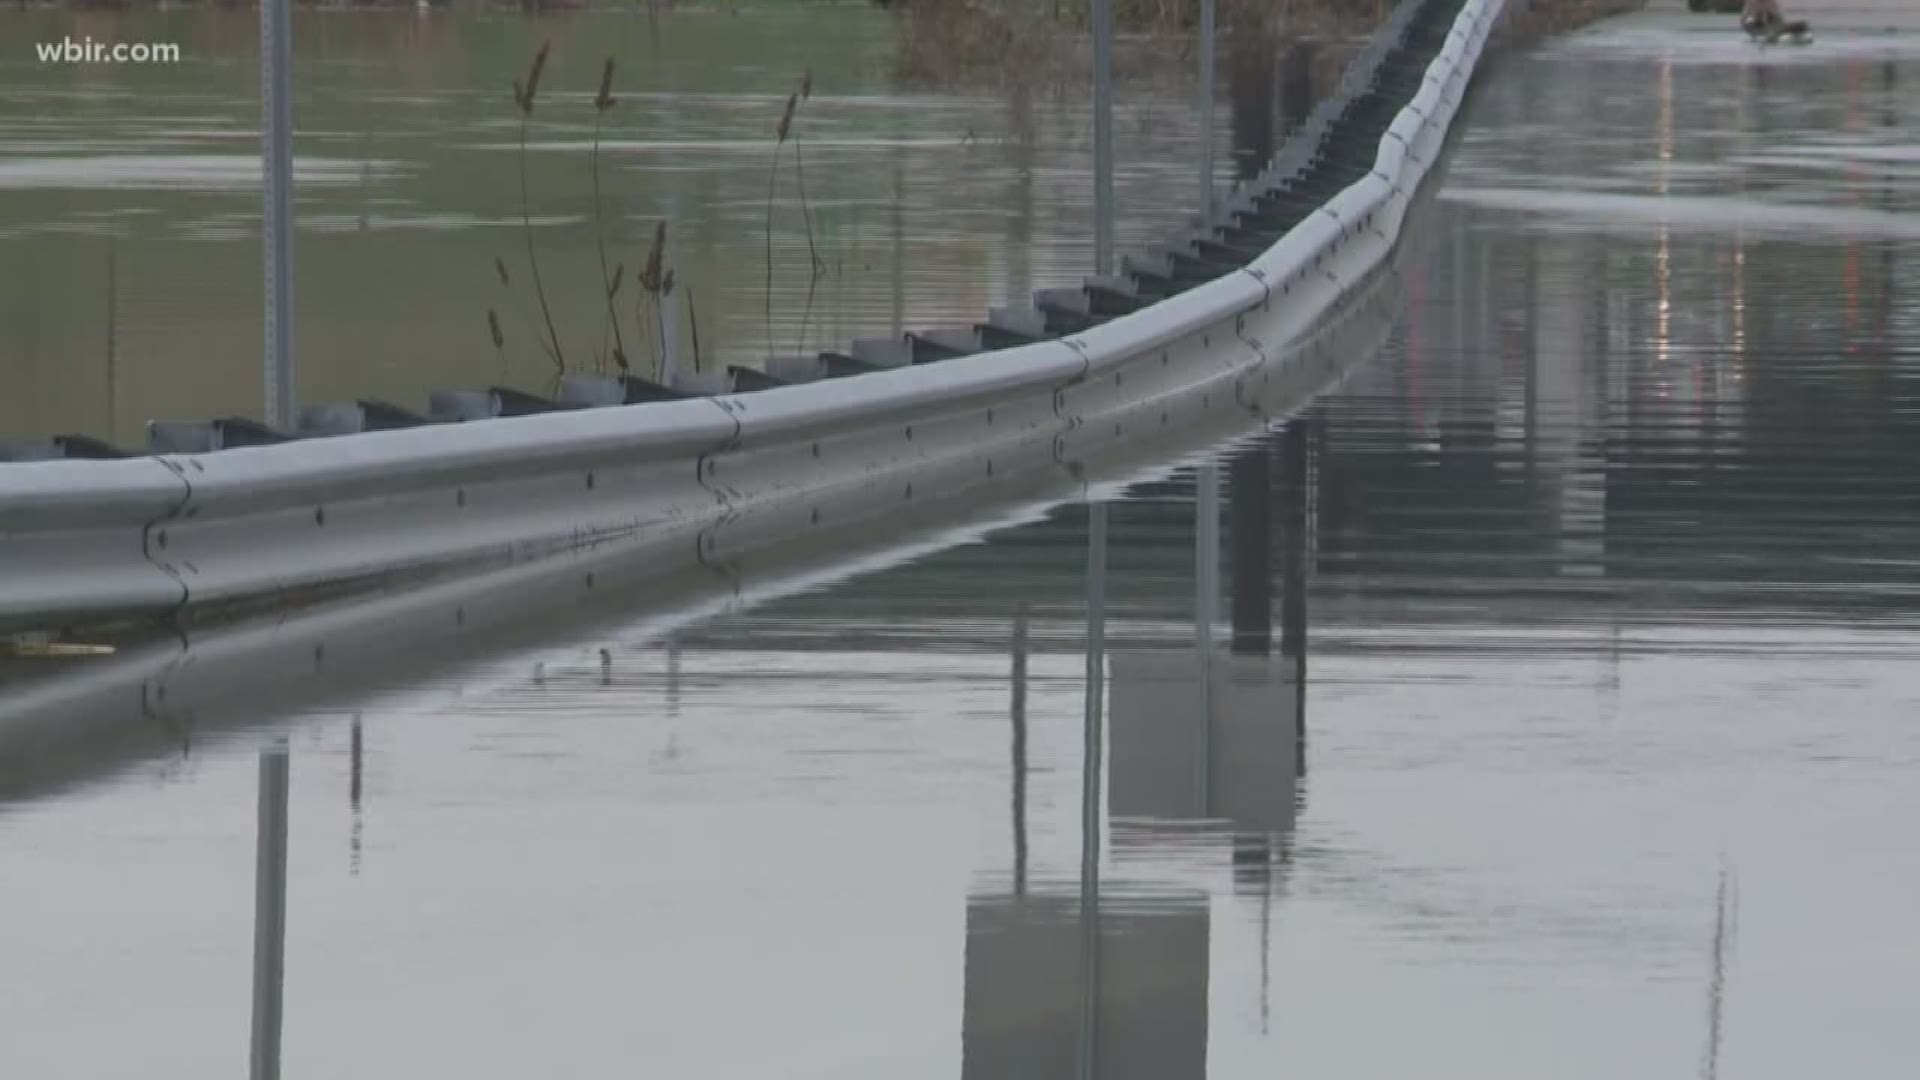 The Knox County and Knoxville Emergency Management Agency says the February flooding caused more than 32 million dollars in damage.